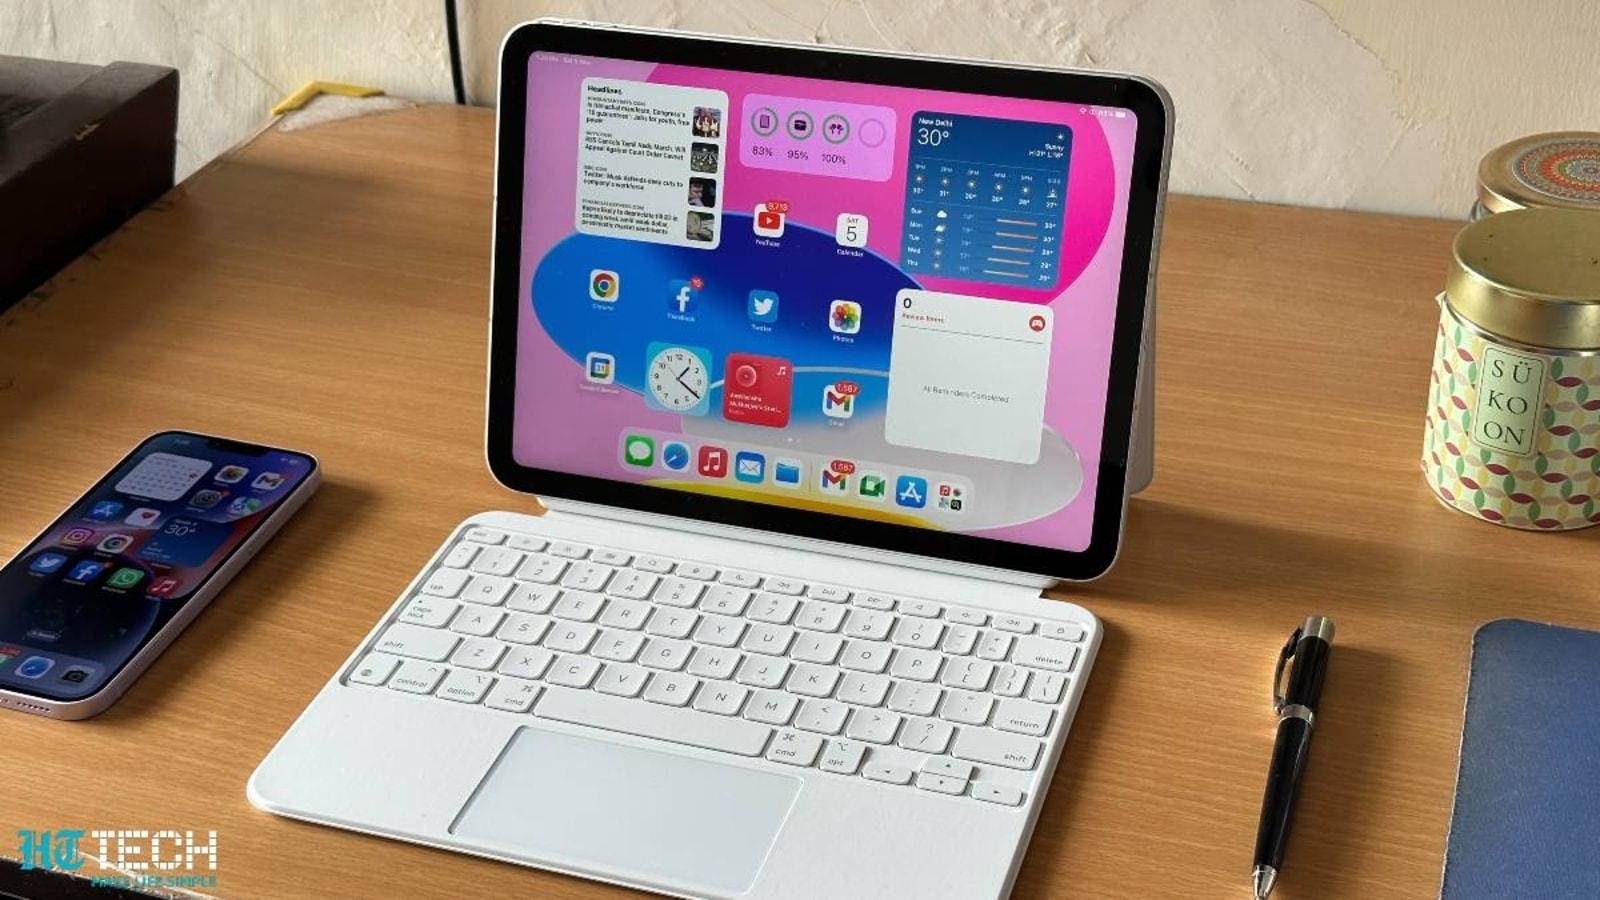 New iPad Pro, MacBook Air to start quickly but no Apple event, says Mark Gurman Know what is coming